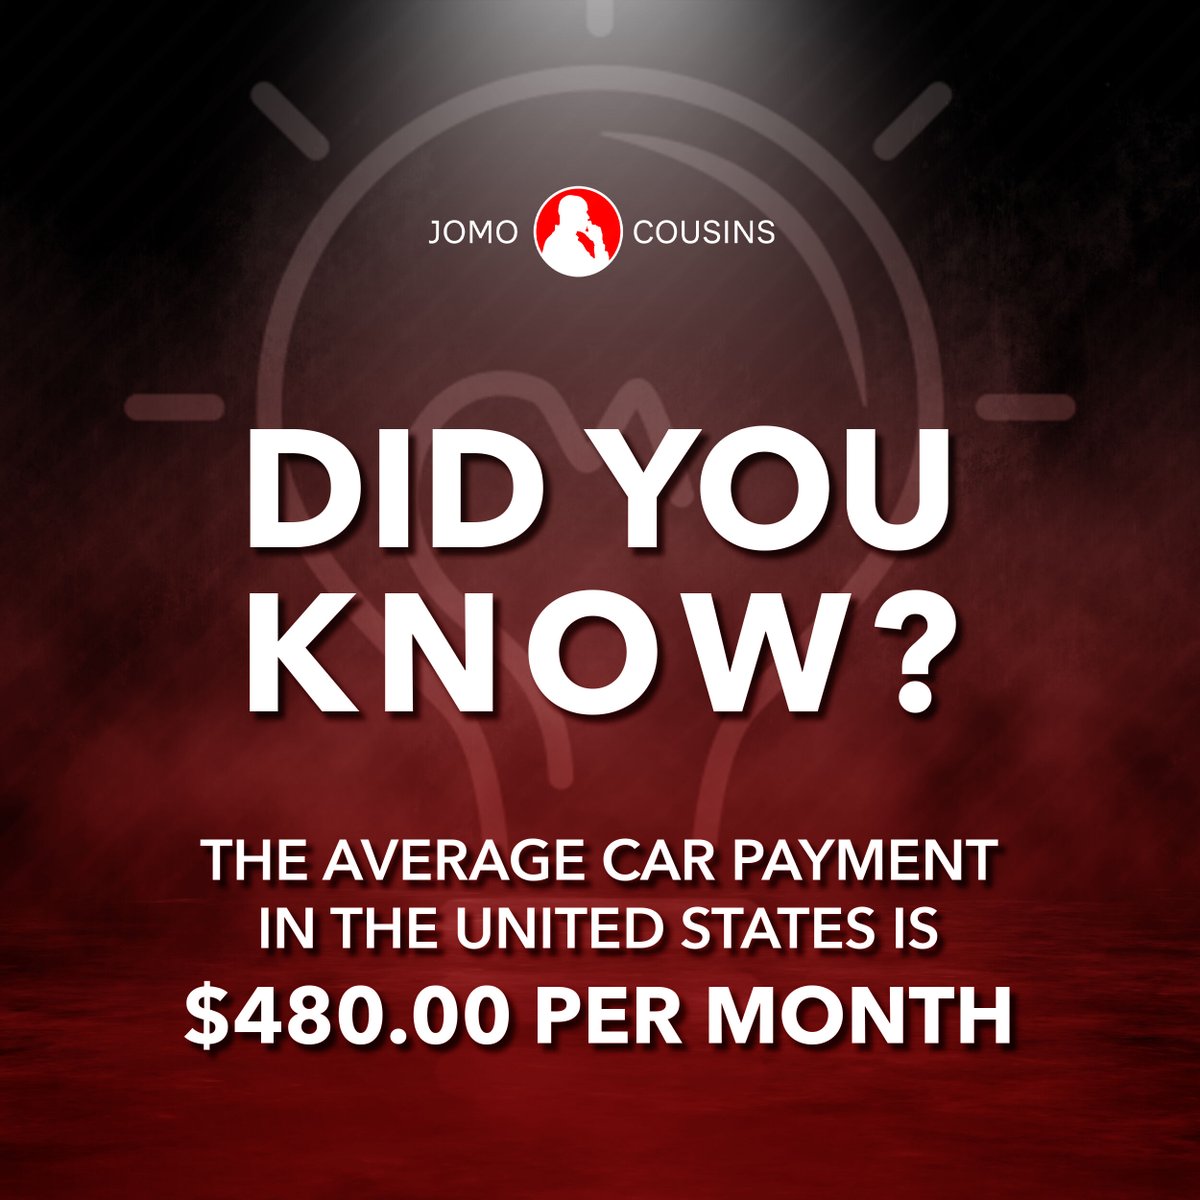 Shocking: Average US car payment is nearly $500/month! It's a significant portion of income. Rethink spending, invest in wealth-building assets instead of depreciating items. 

#CarCosts #BudgetForWealth #MoneyManagement #FinancialPlanning #InvestSmart #DebtFreeLiving